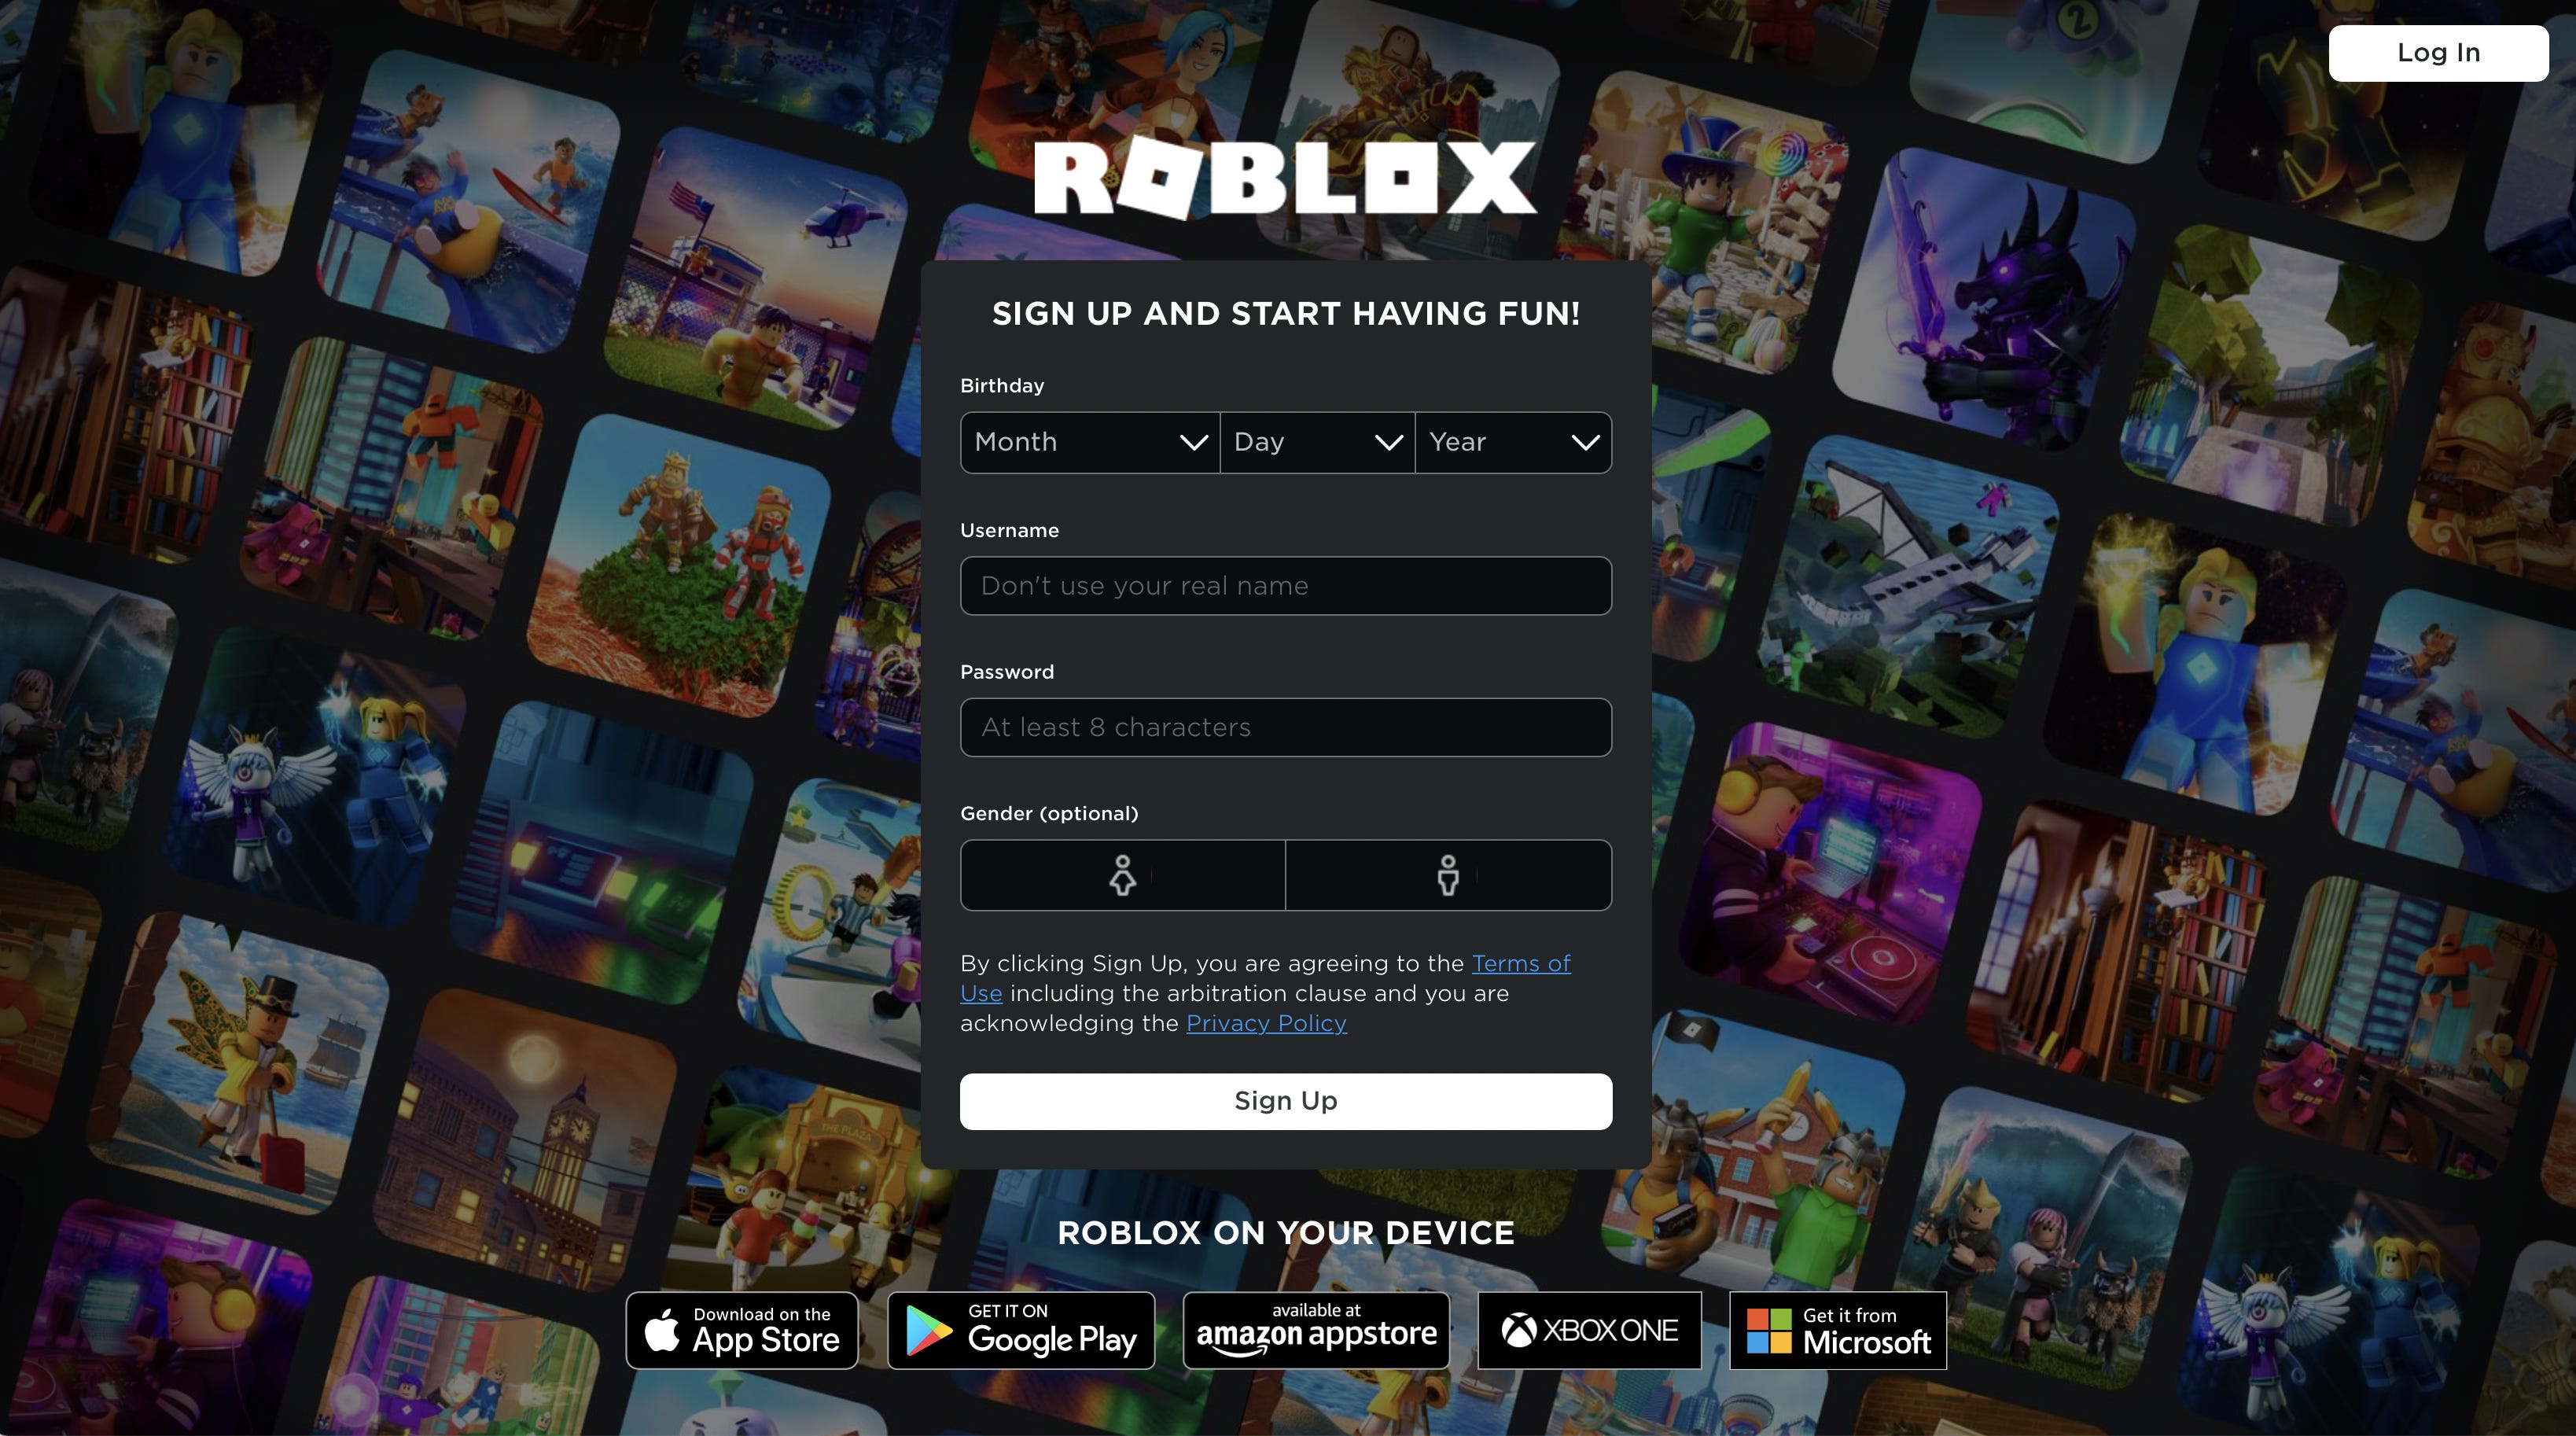 Roblox S Growth Strategies And Why Becoming A Metaverse Is A Bad Idea By Benjamin Schroeder No Ordinary Strategy - let it grow roblox